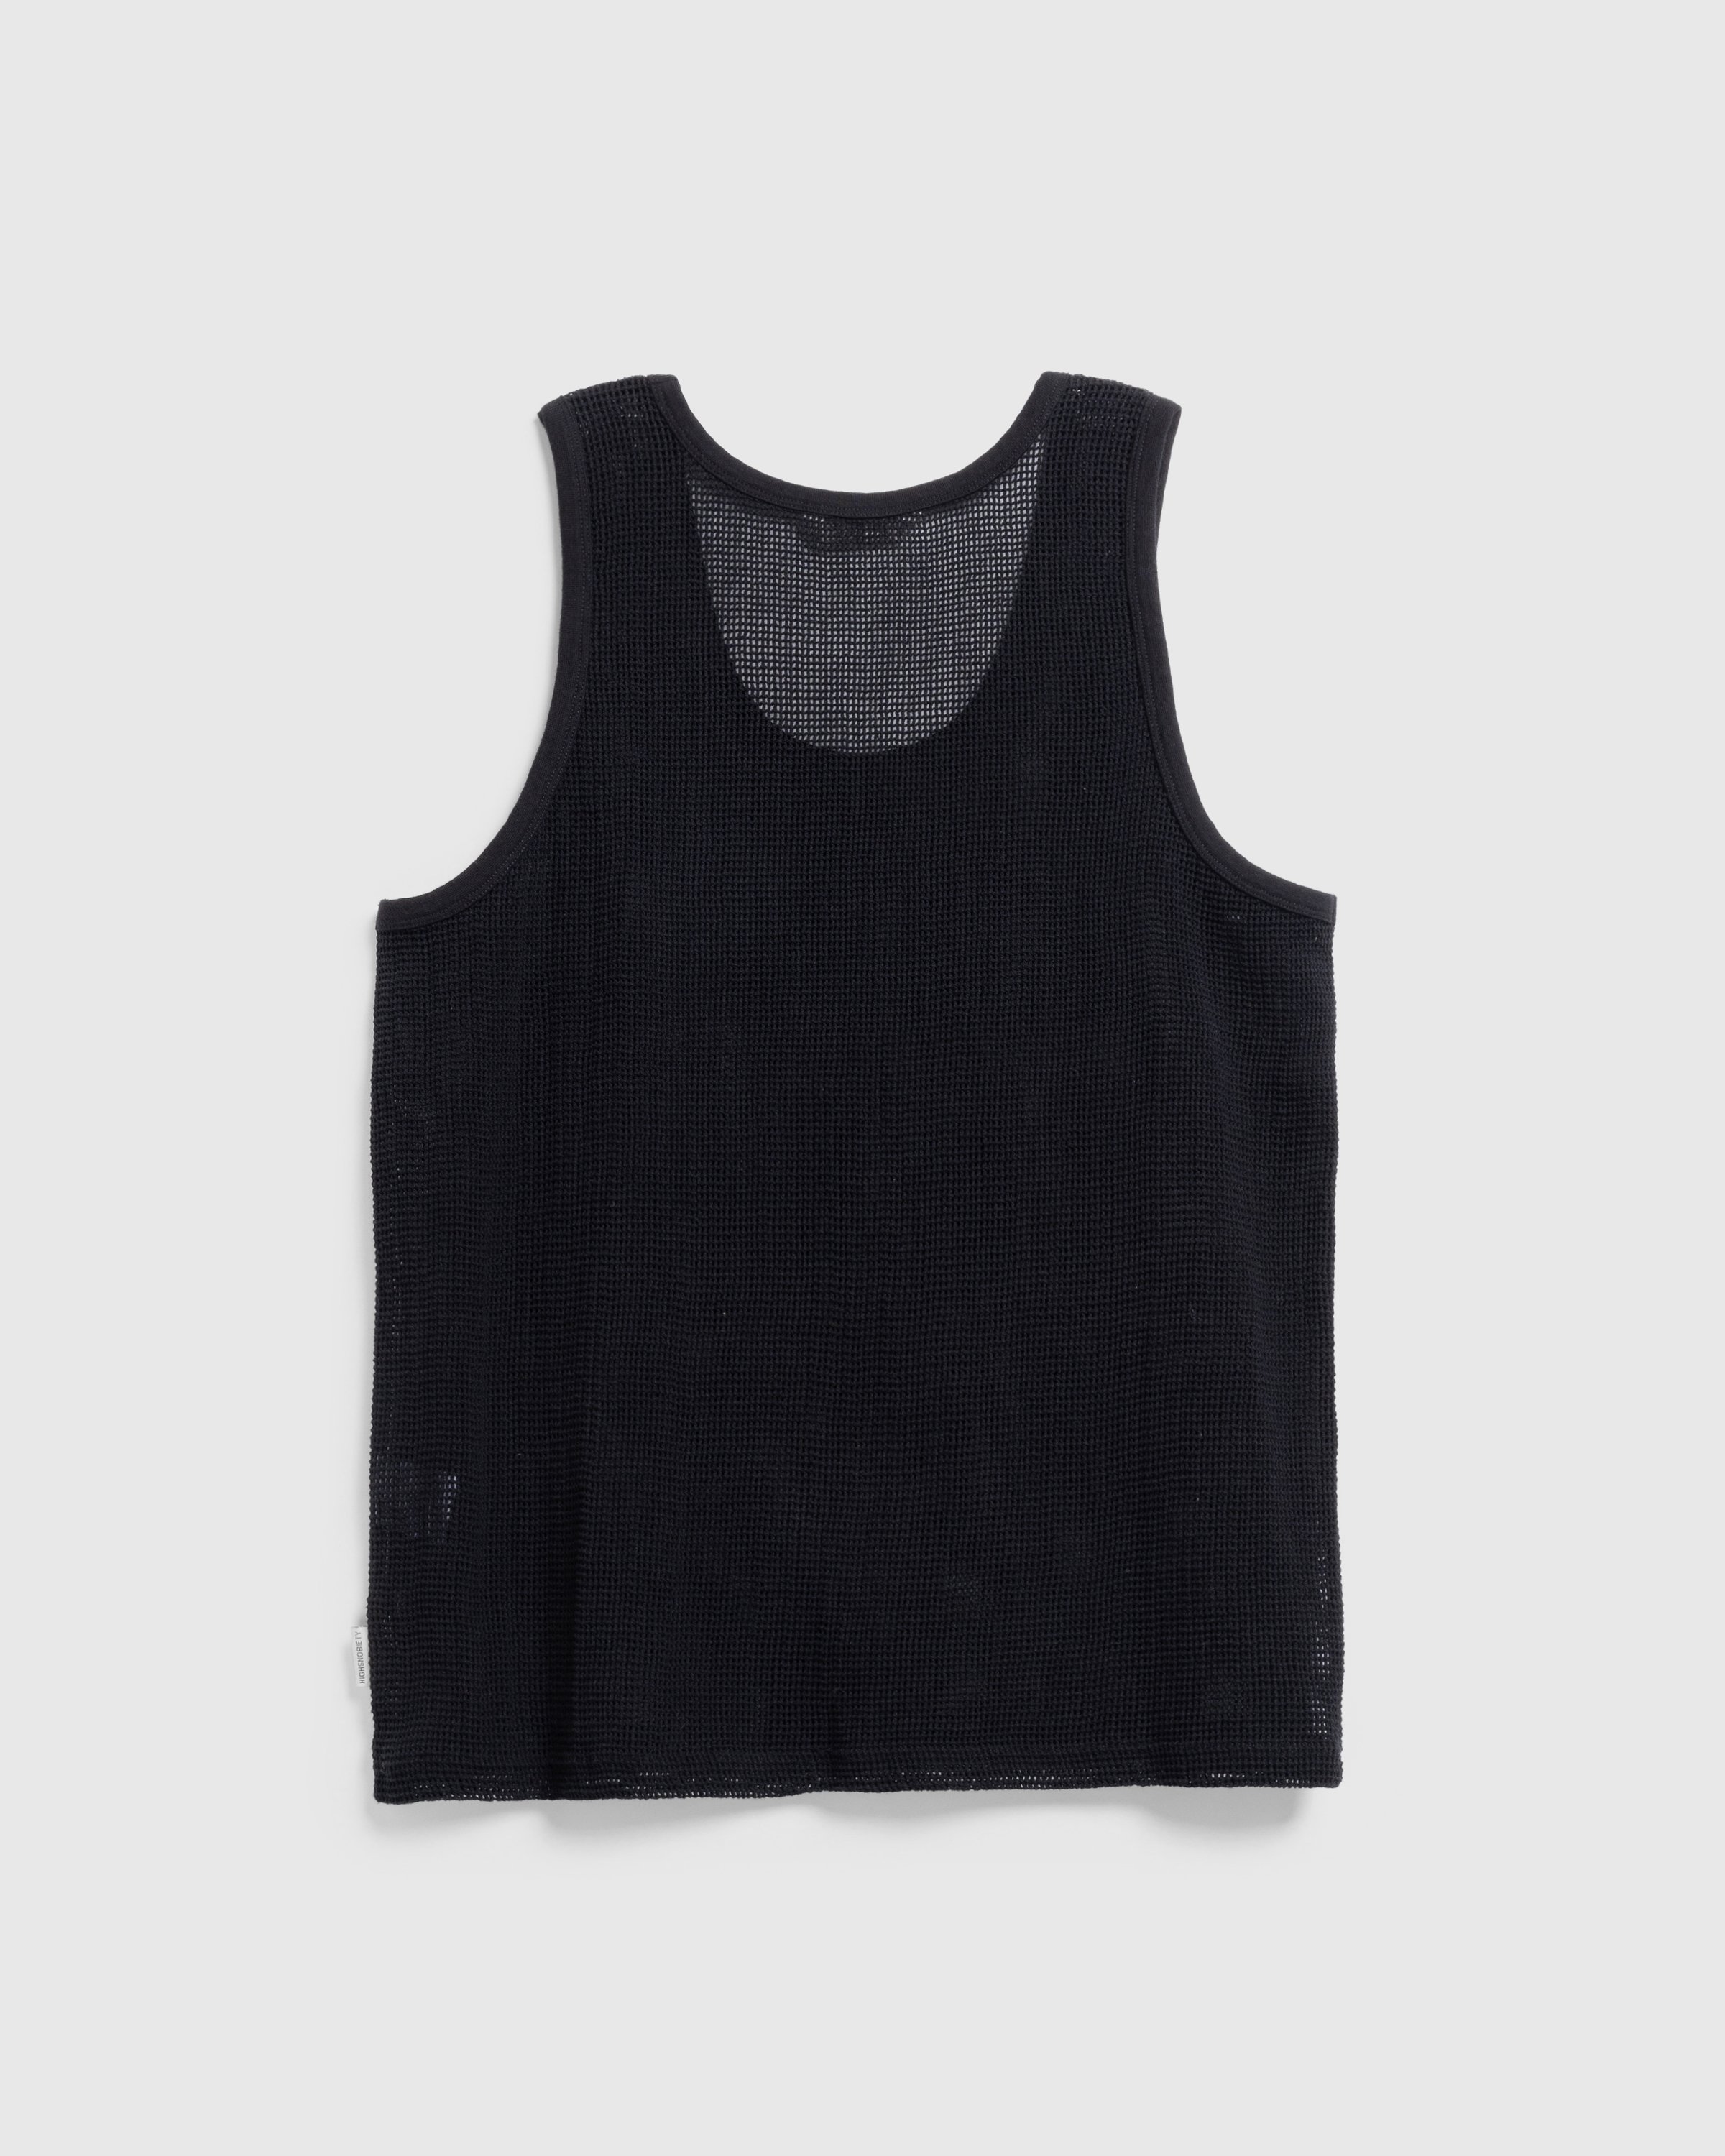 Highsnobiety HS05 - Pigment Dyed Cotton Mesh Tank Top Black - Clothing -  - Image 2